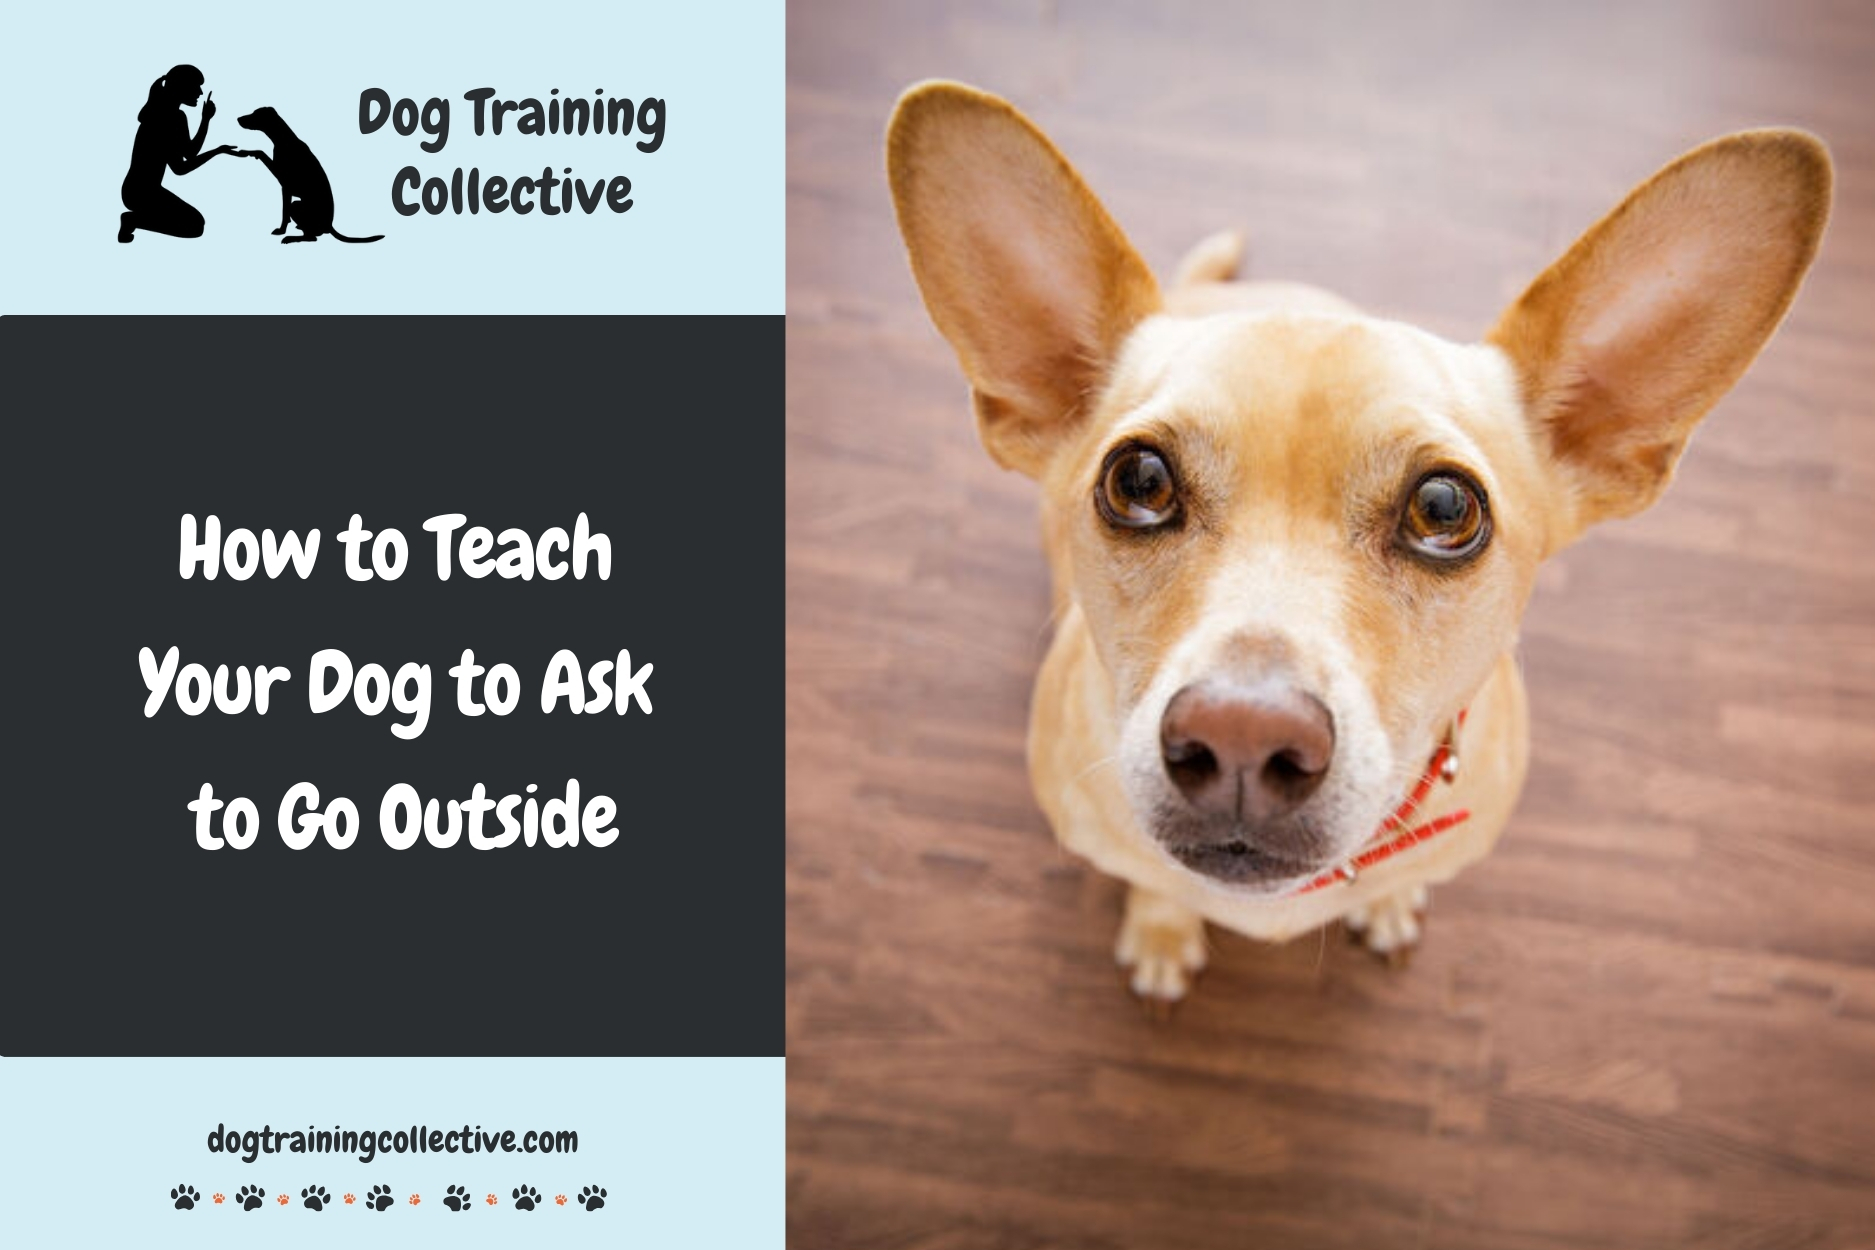 How to Teach Your Dog to Ask to Go Outside